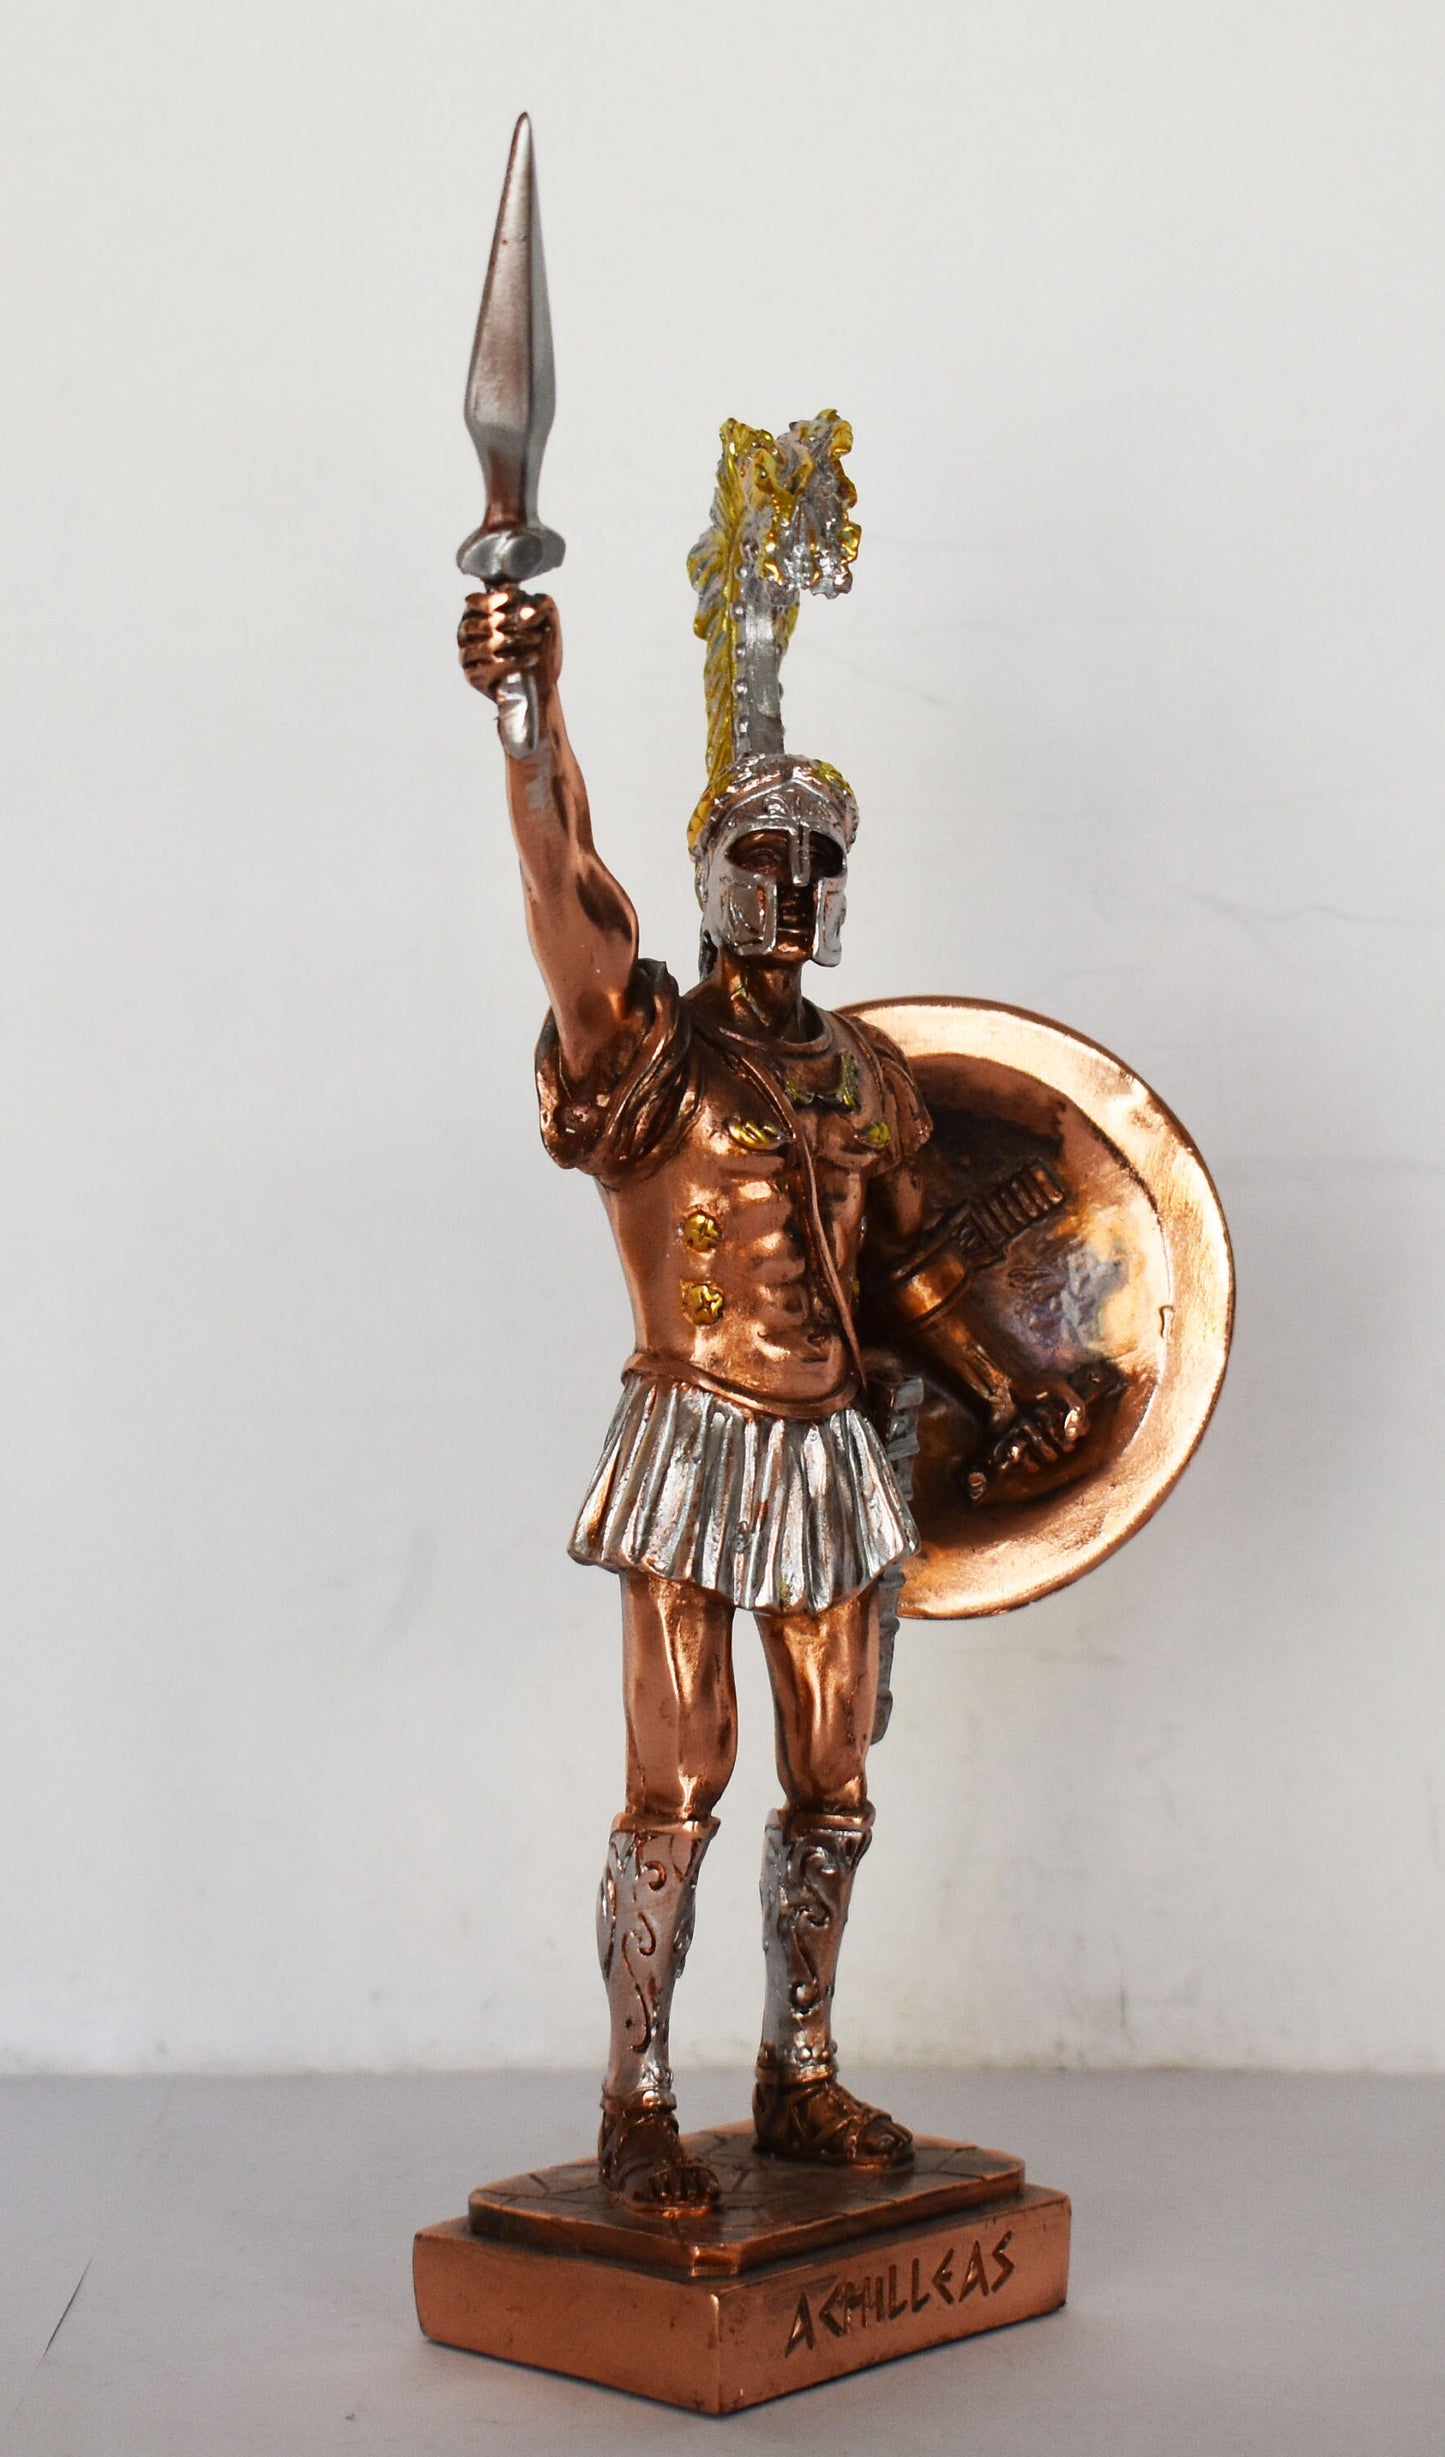 Achilles - King of the Myrmidons - Greek Hero of Trojan War - Son of Thetis and Peleus - Homer's Iliad  - Copper Plated Alabaster